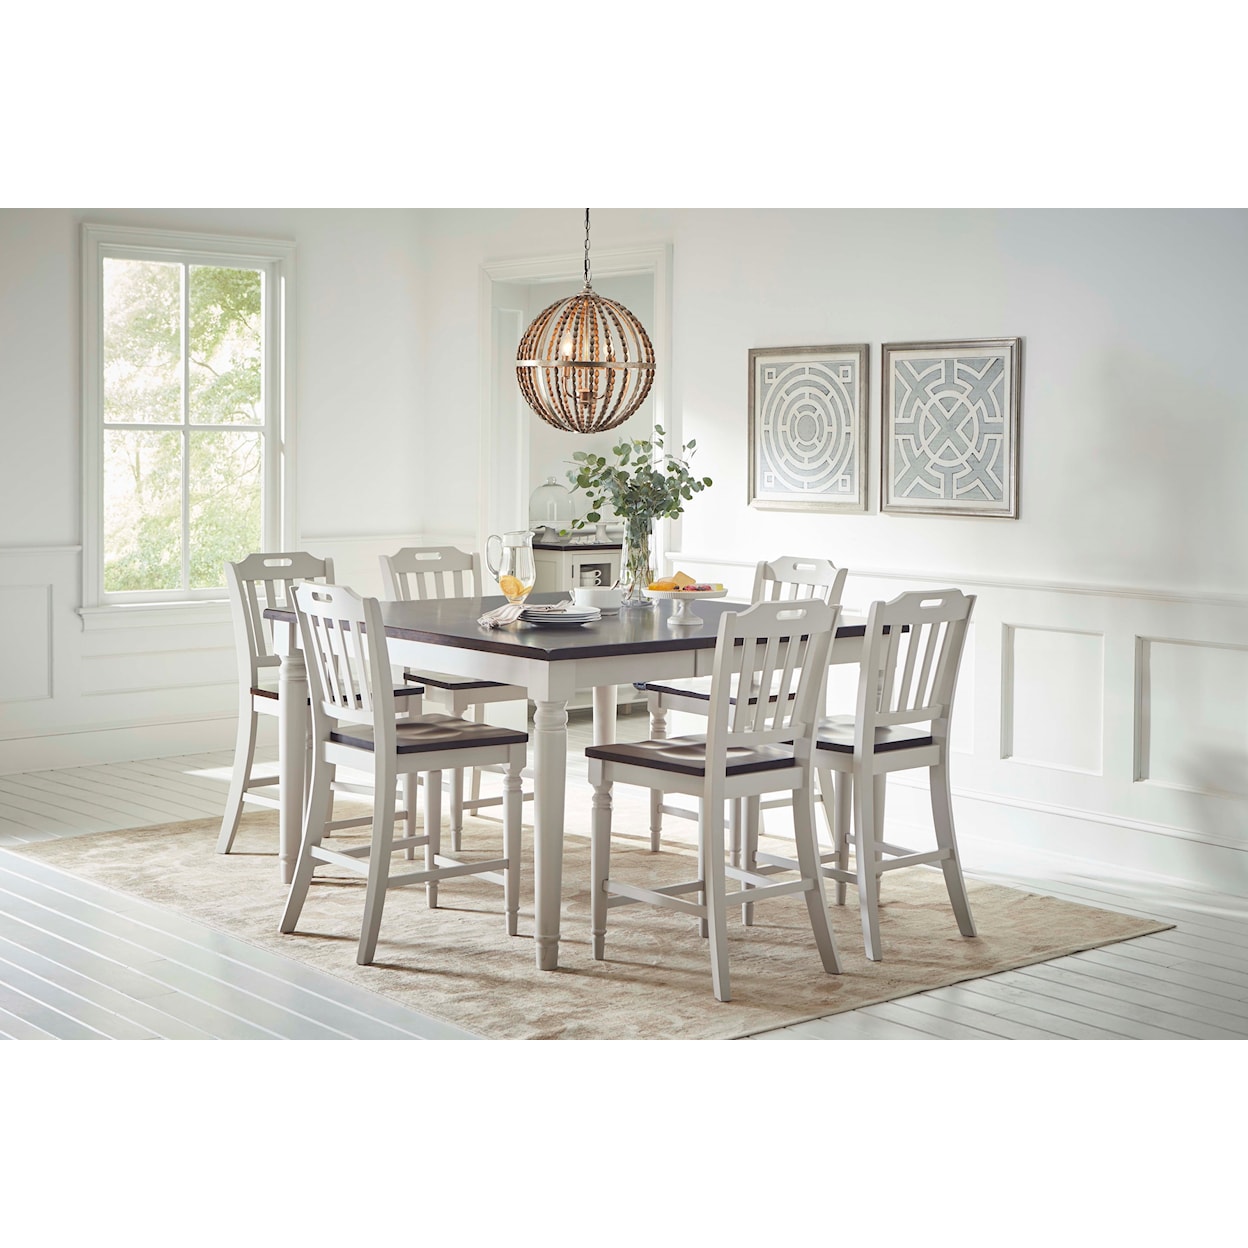 Jofran Orchard Park Counter Height Dining Table with 8 Chairs